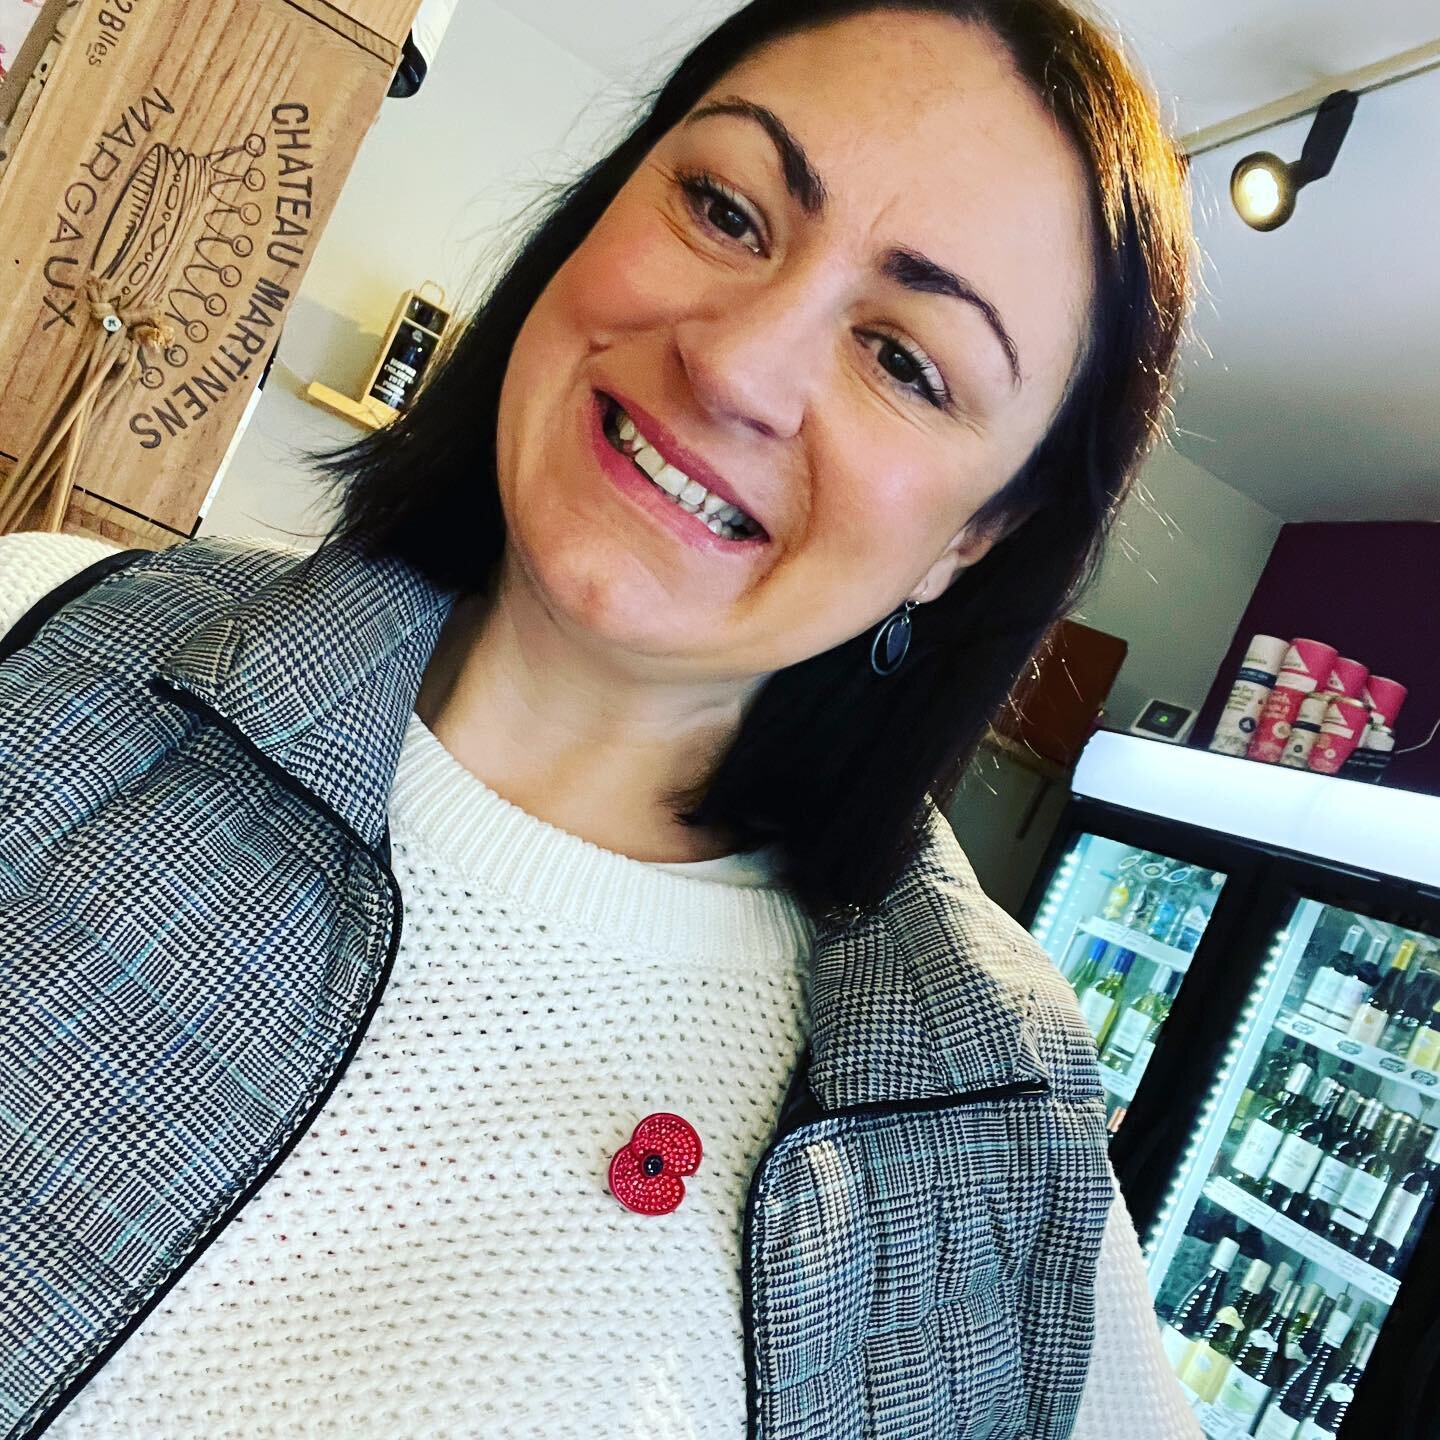 It&rsquo;s that time of year again to wear your @royalbritishlegion poppy in support of our armed forces past and present and to remember.
Poppies are available in the shop by the front door and at many other establishments along #pitshangerlane 

#p